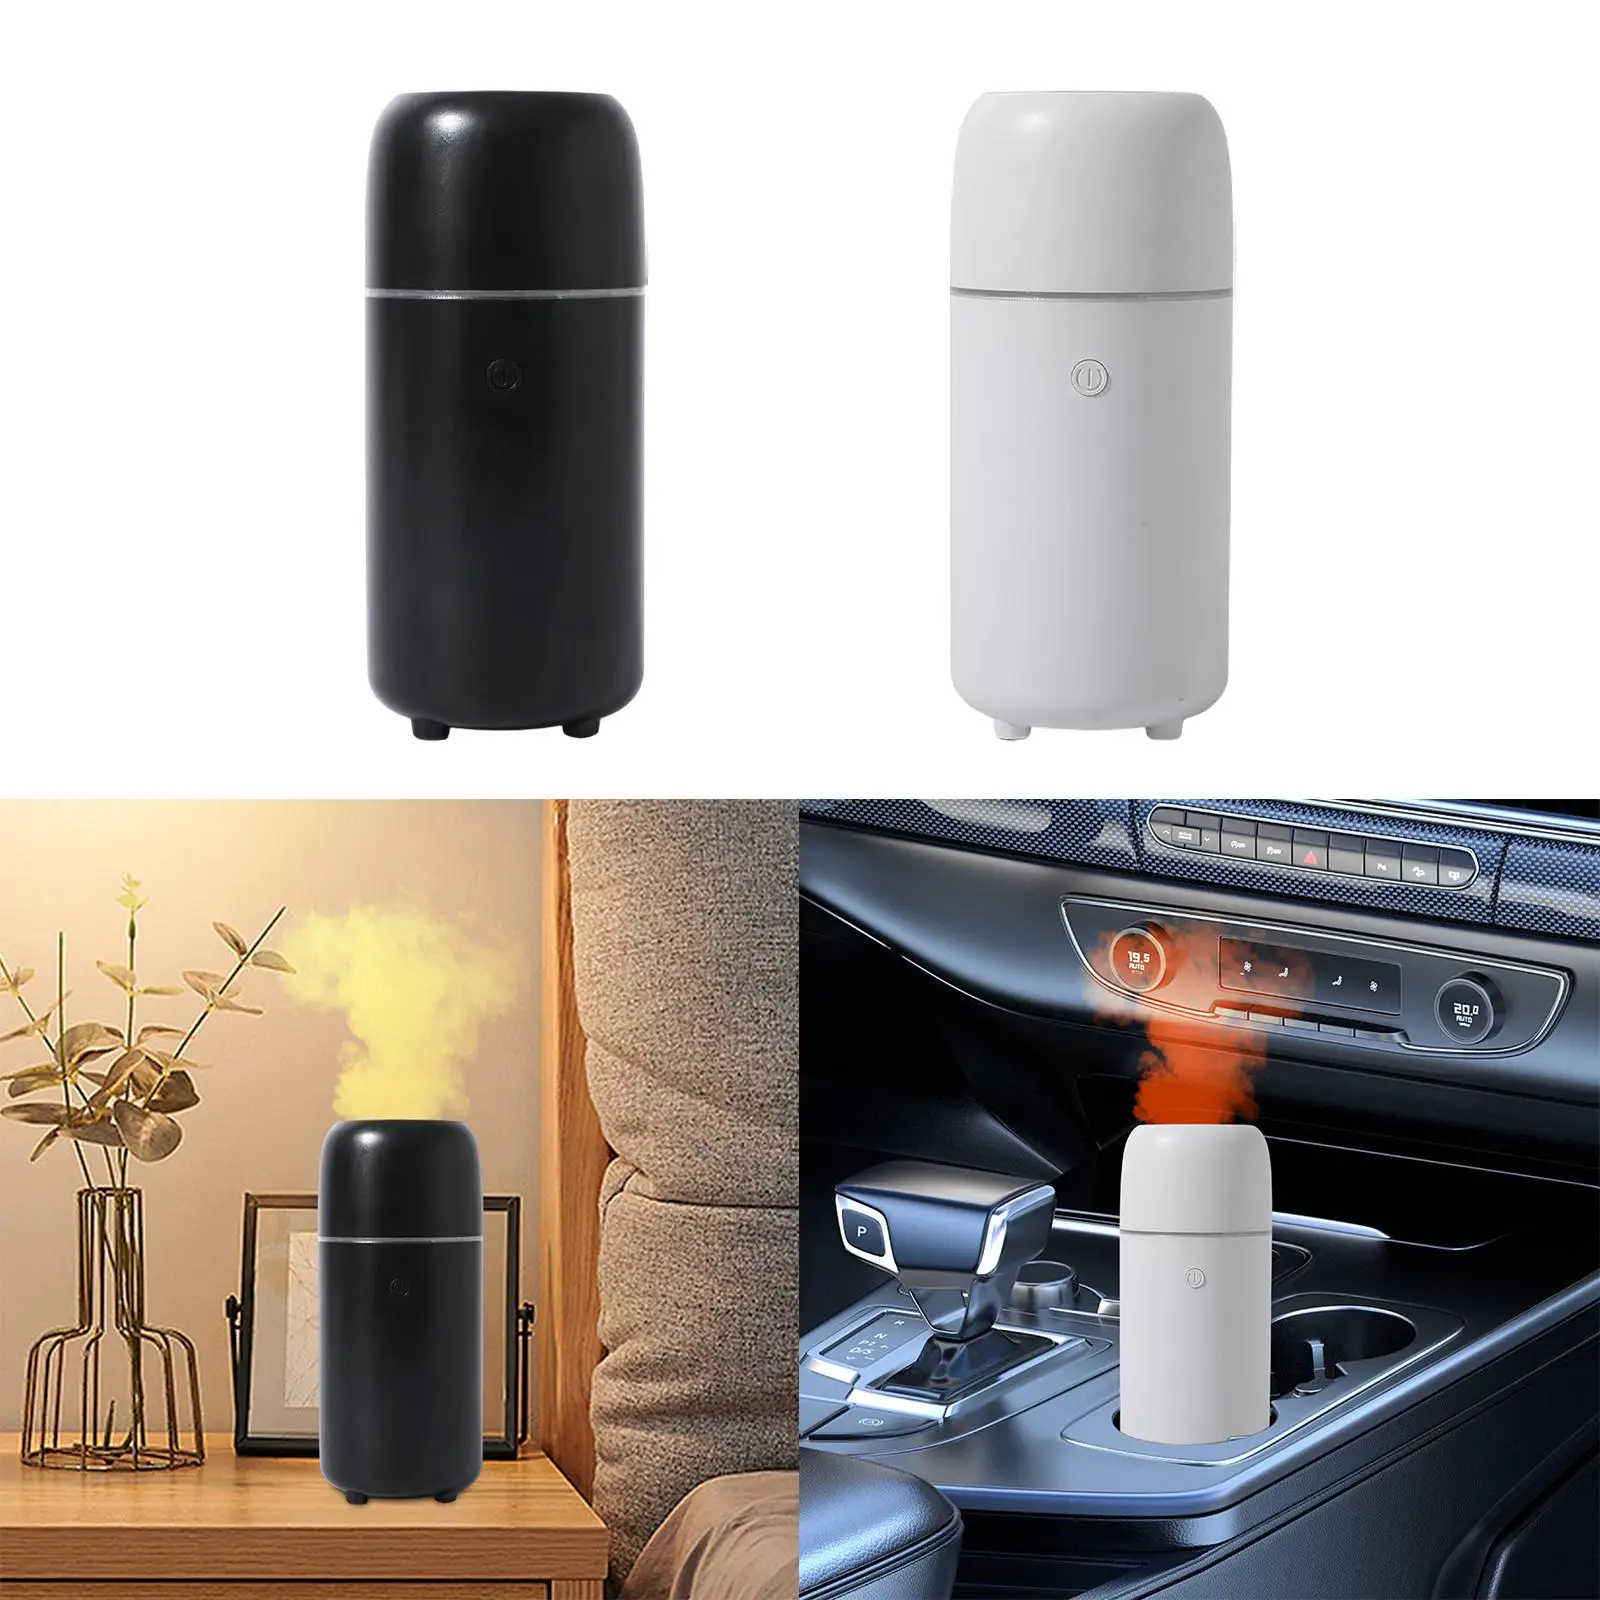 Portable Humidifiers Air Humidifier Auto Shut Off Quiet Mini Humidifier for Bedside Whole Room Baby Nursery NightStand Bedroom